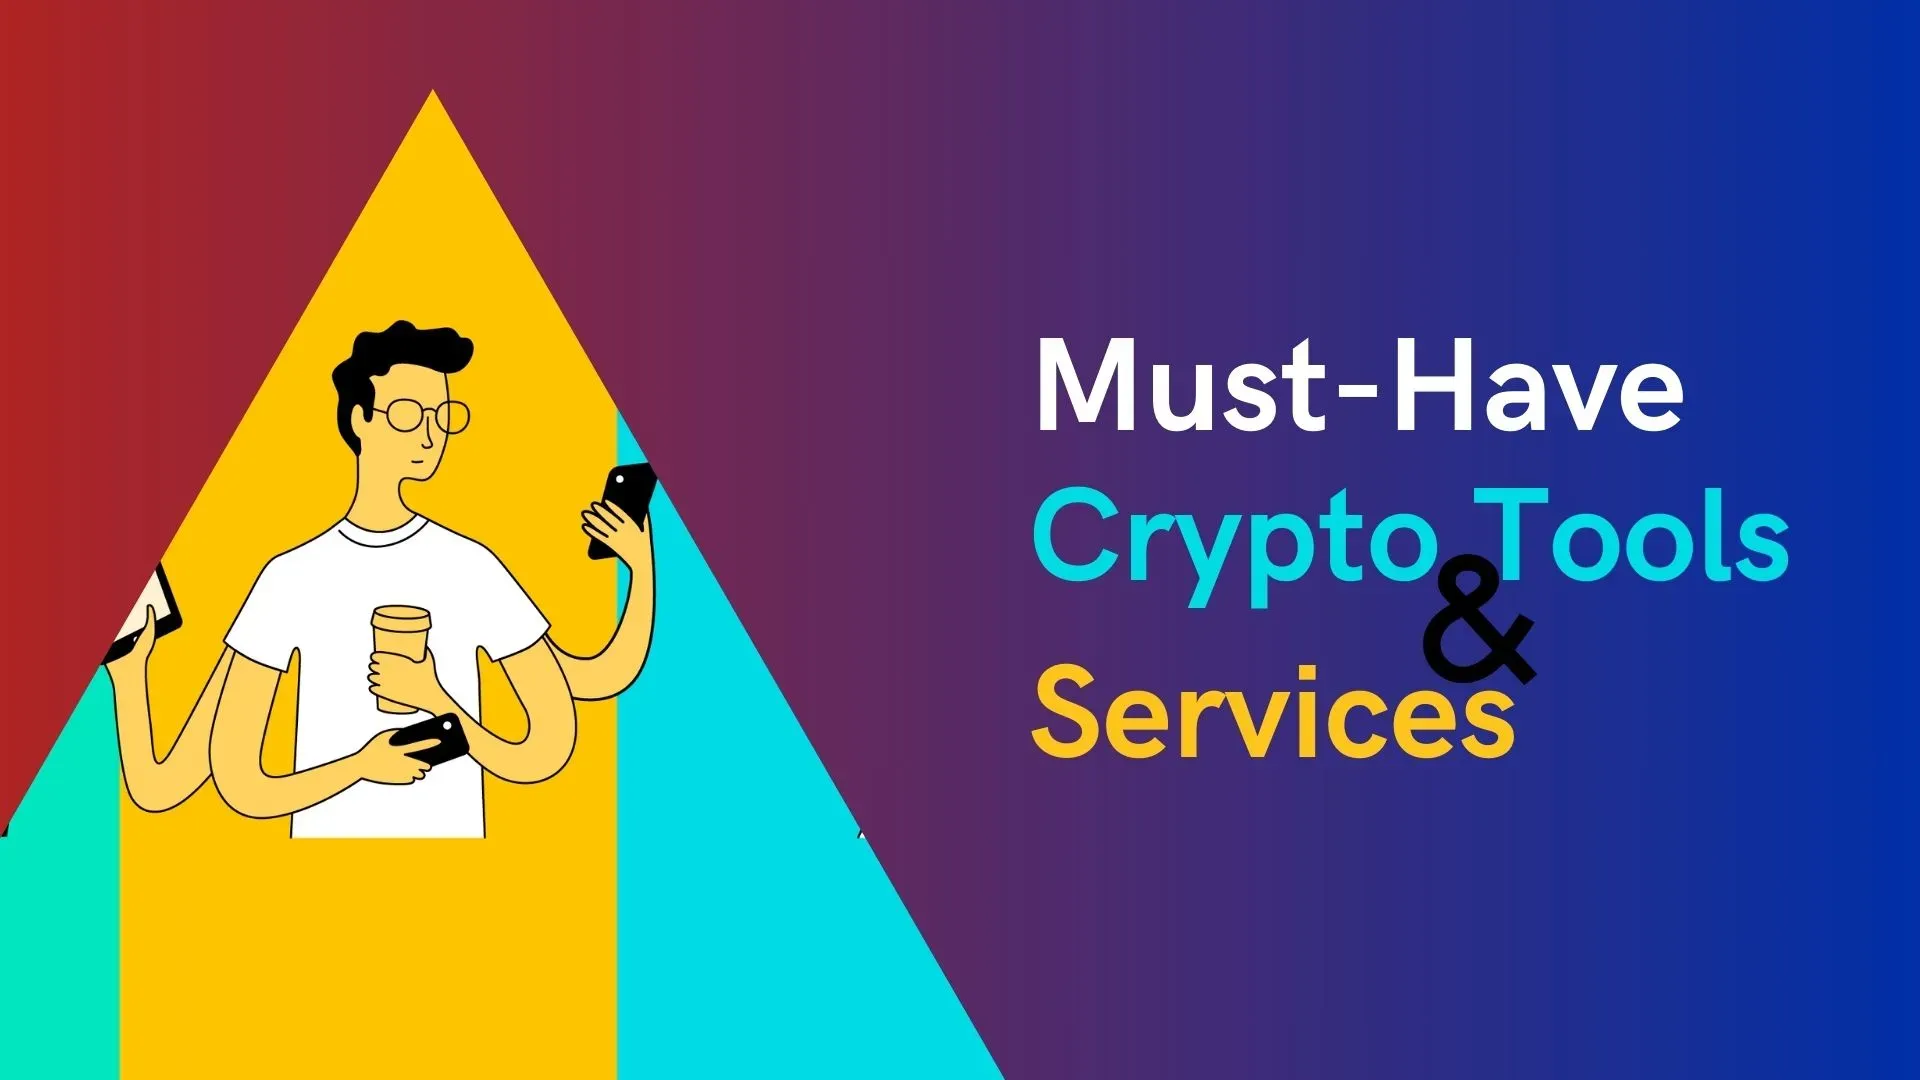 7 Must-Have Crypto Tools & Services For Asian Crypto Users